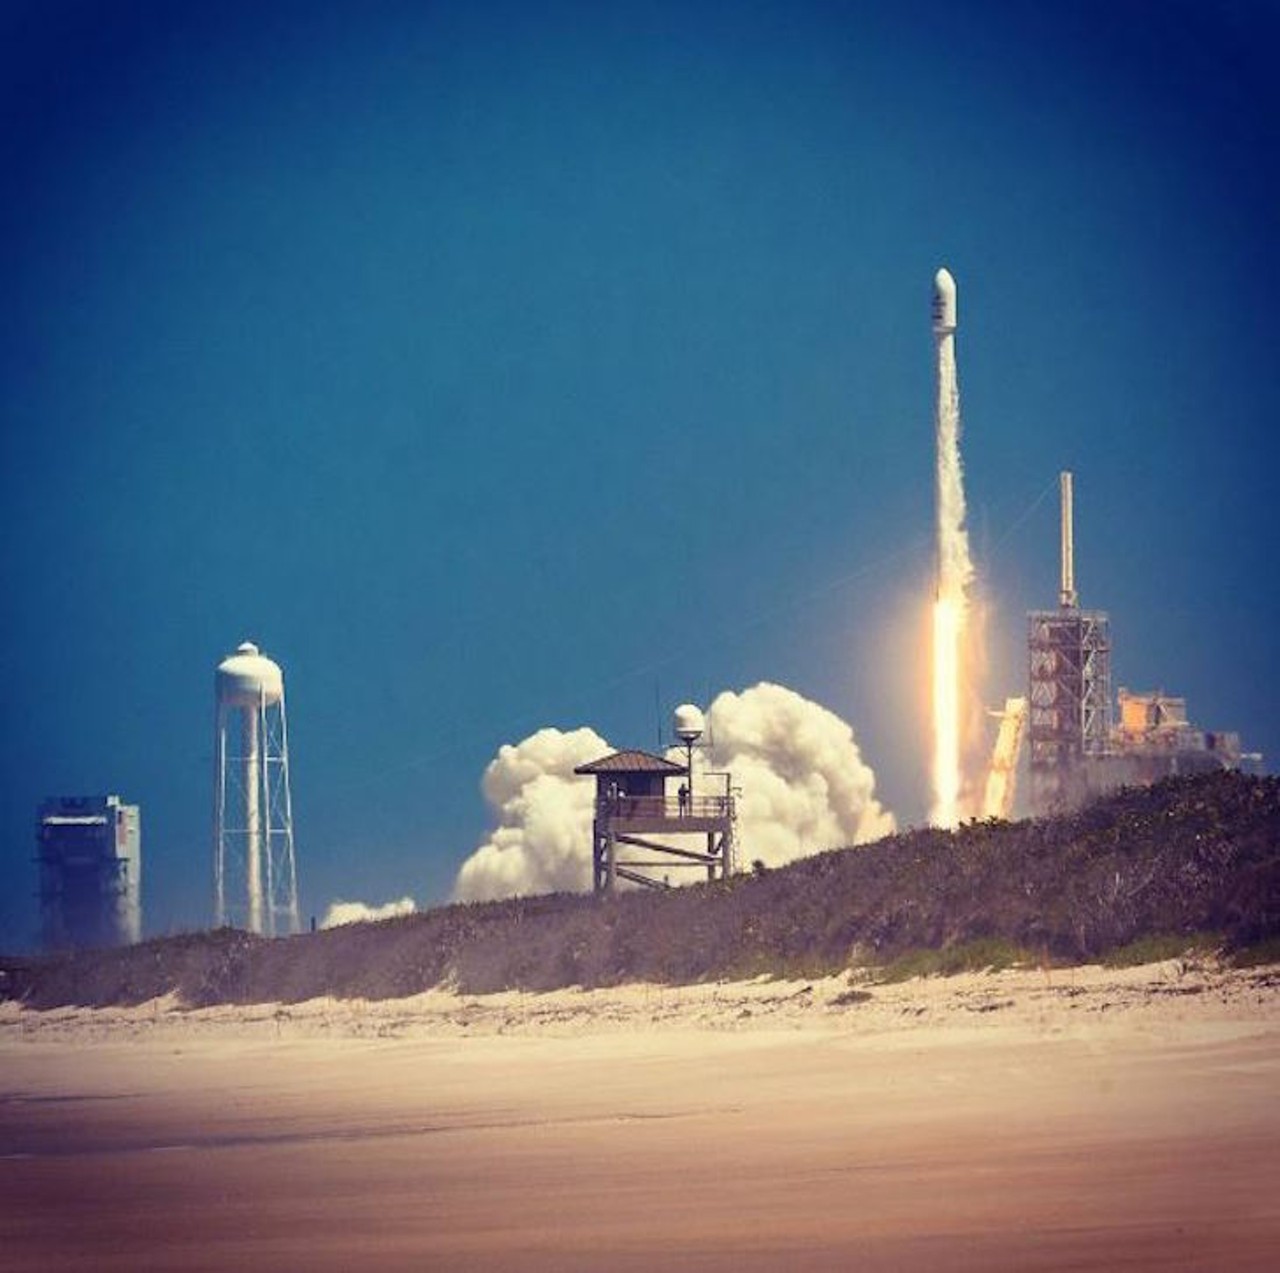 Playalinda
Driving distance from Orlando: 1 hour 15 minutes 
Tucked away in the Canaveral National Seashore is Playalinda. It&#146;s a hidden gem among local surfers, a welcome reprieve from other more crowded Florida beaches and not a bad spot to watch a rocket shoot off from nearby Kennedy Space Center.
Photo via timb70mm/Instagram